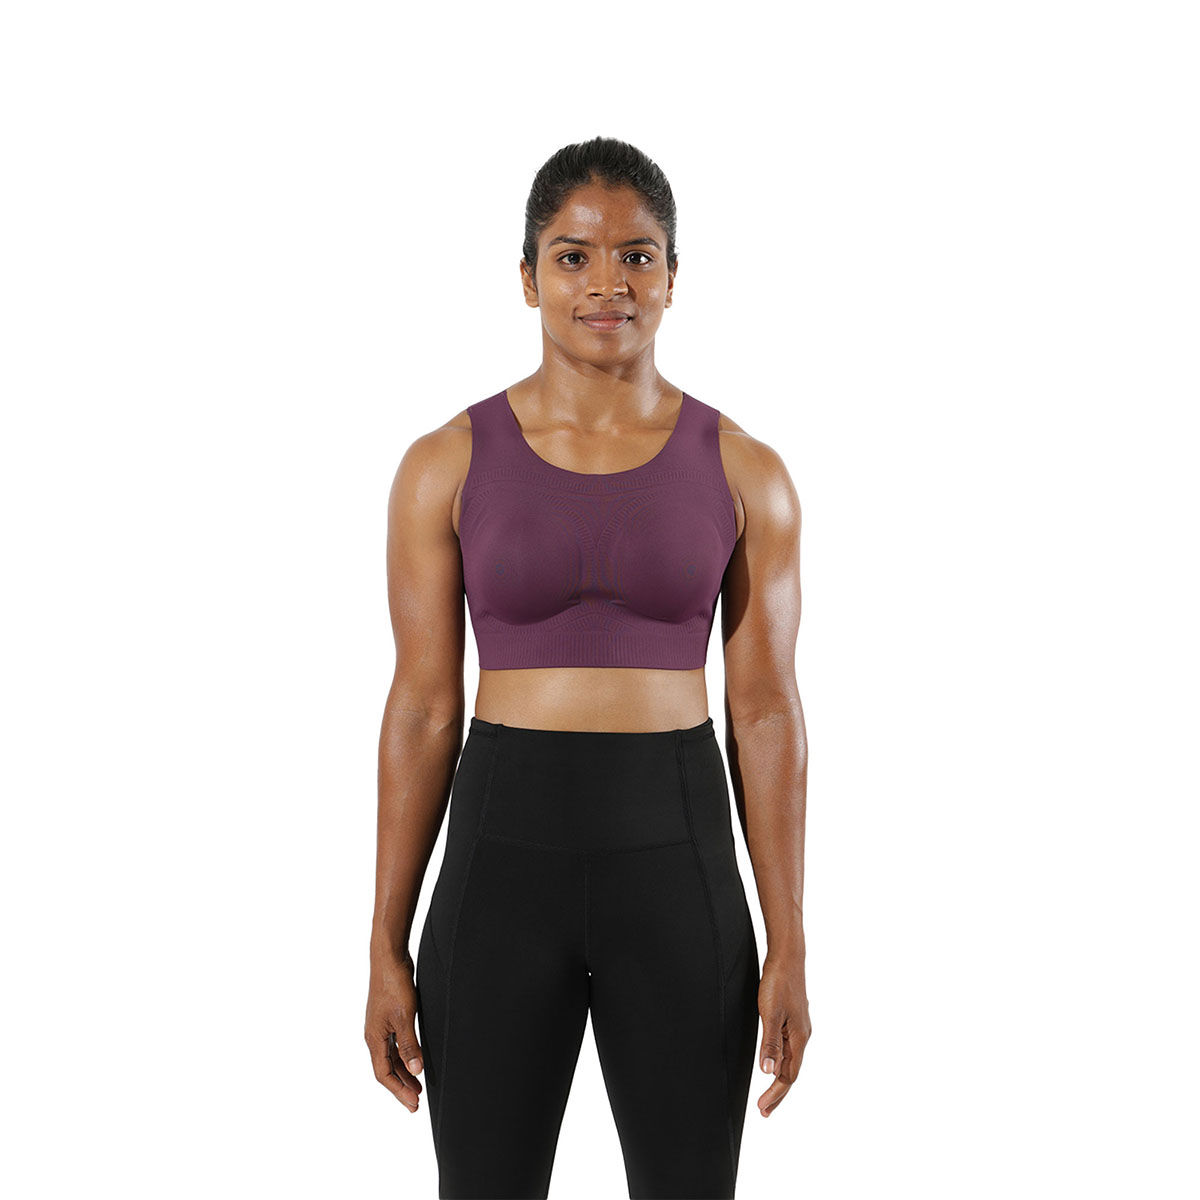 Buy Blissclub Power Up Sports Bra for 3D Support and 3X More